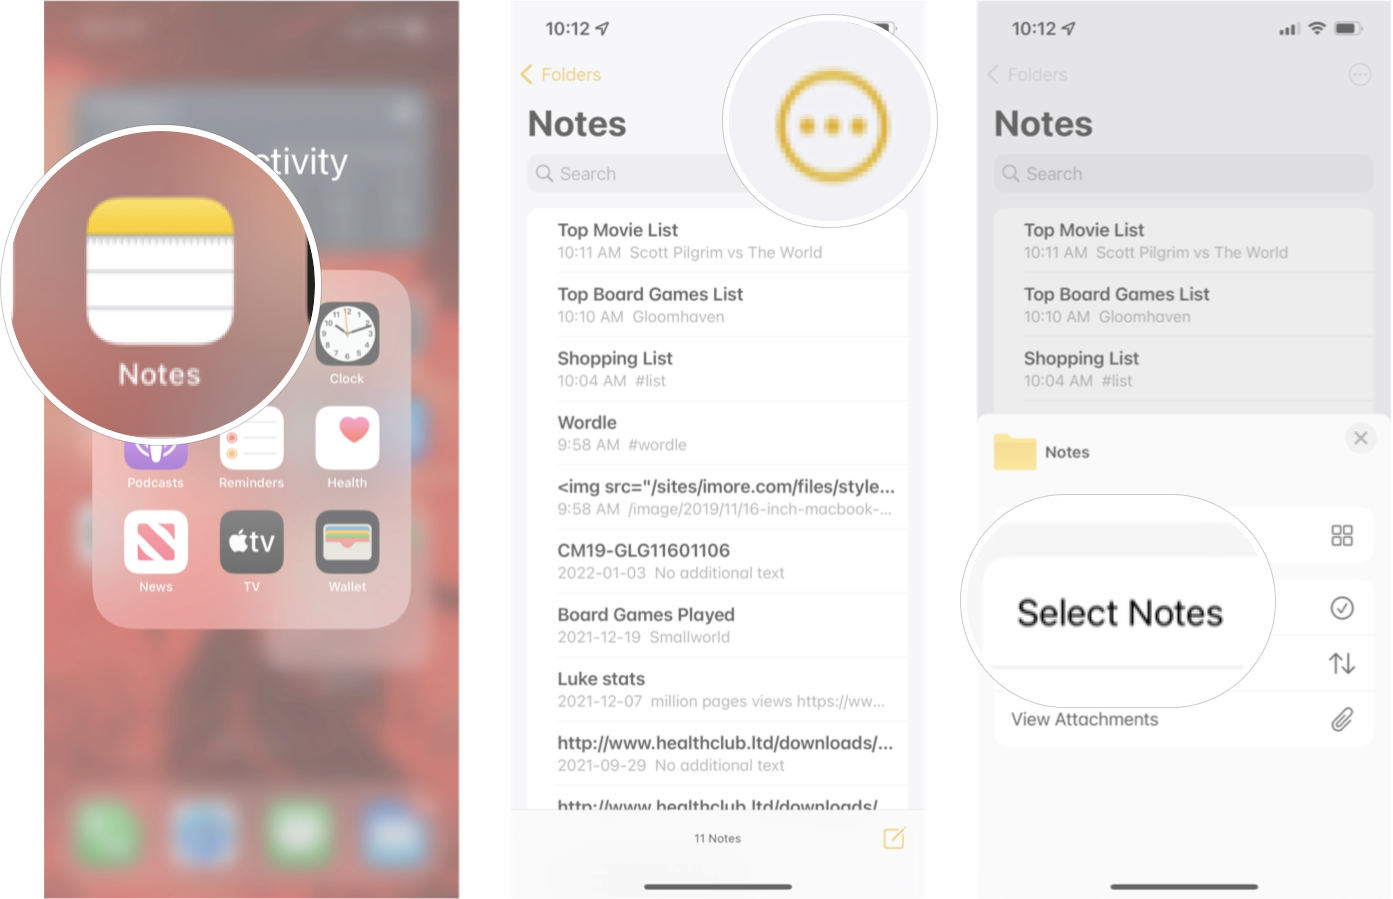 How To Add Tags To Multiple Notes In Ios 15: Launch Notes, tap the more button, and then tap select notes.